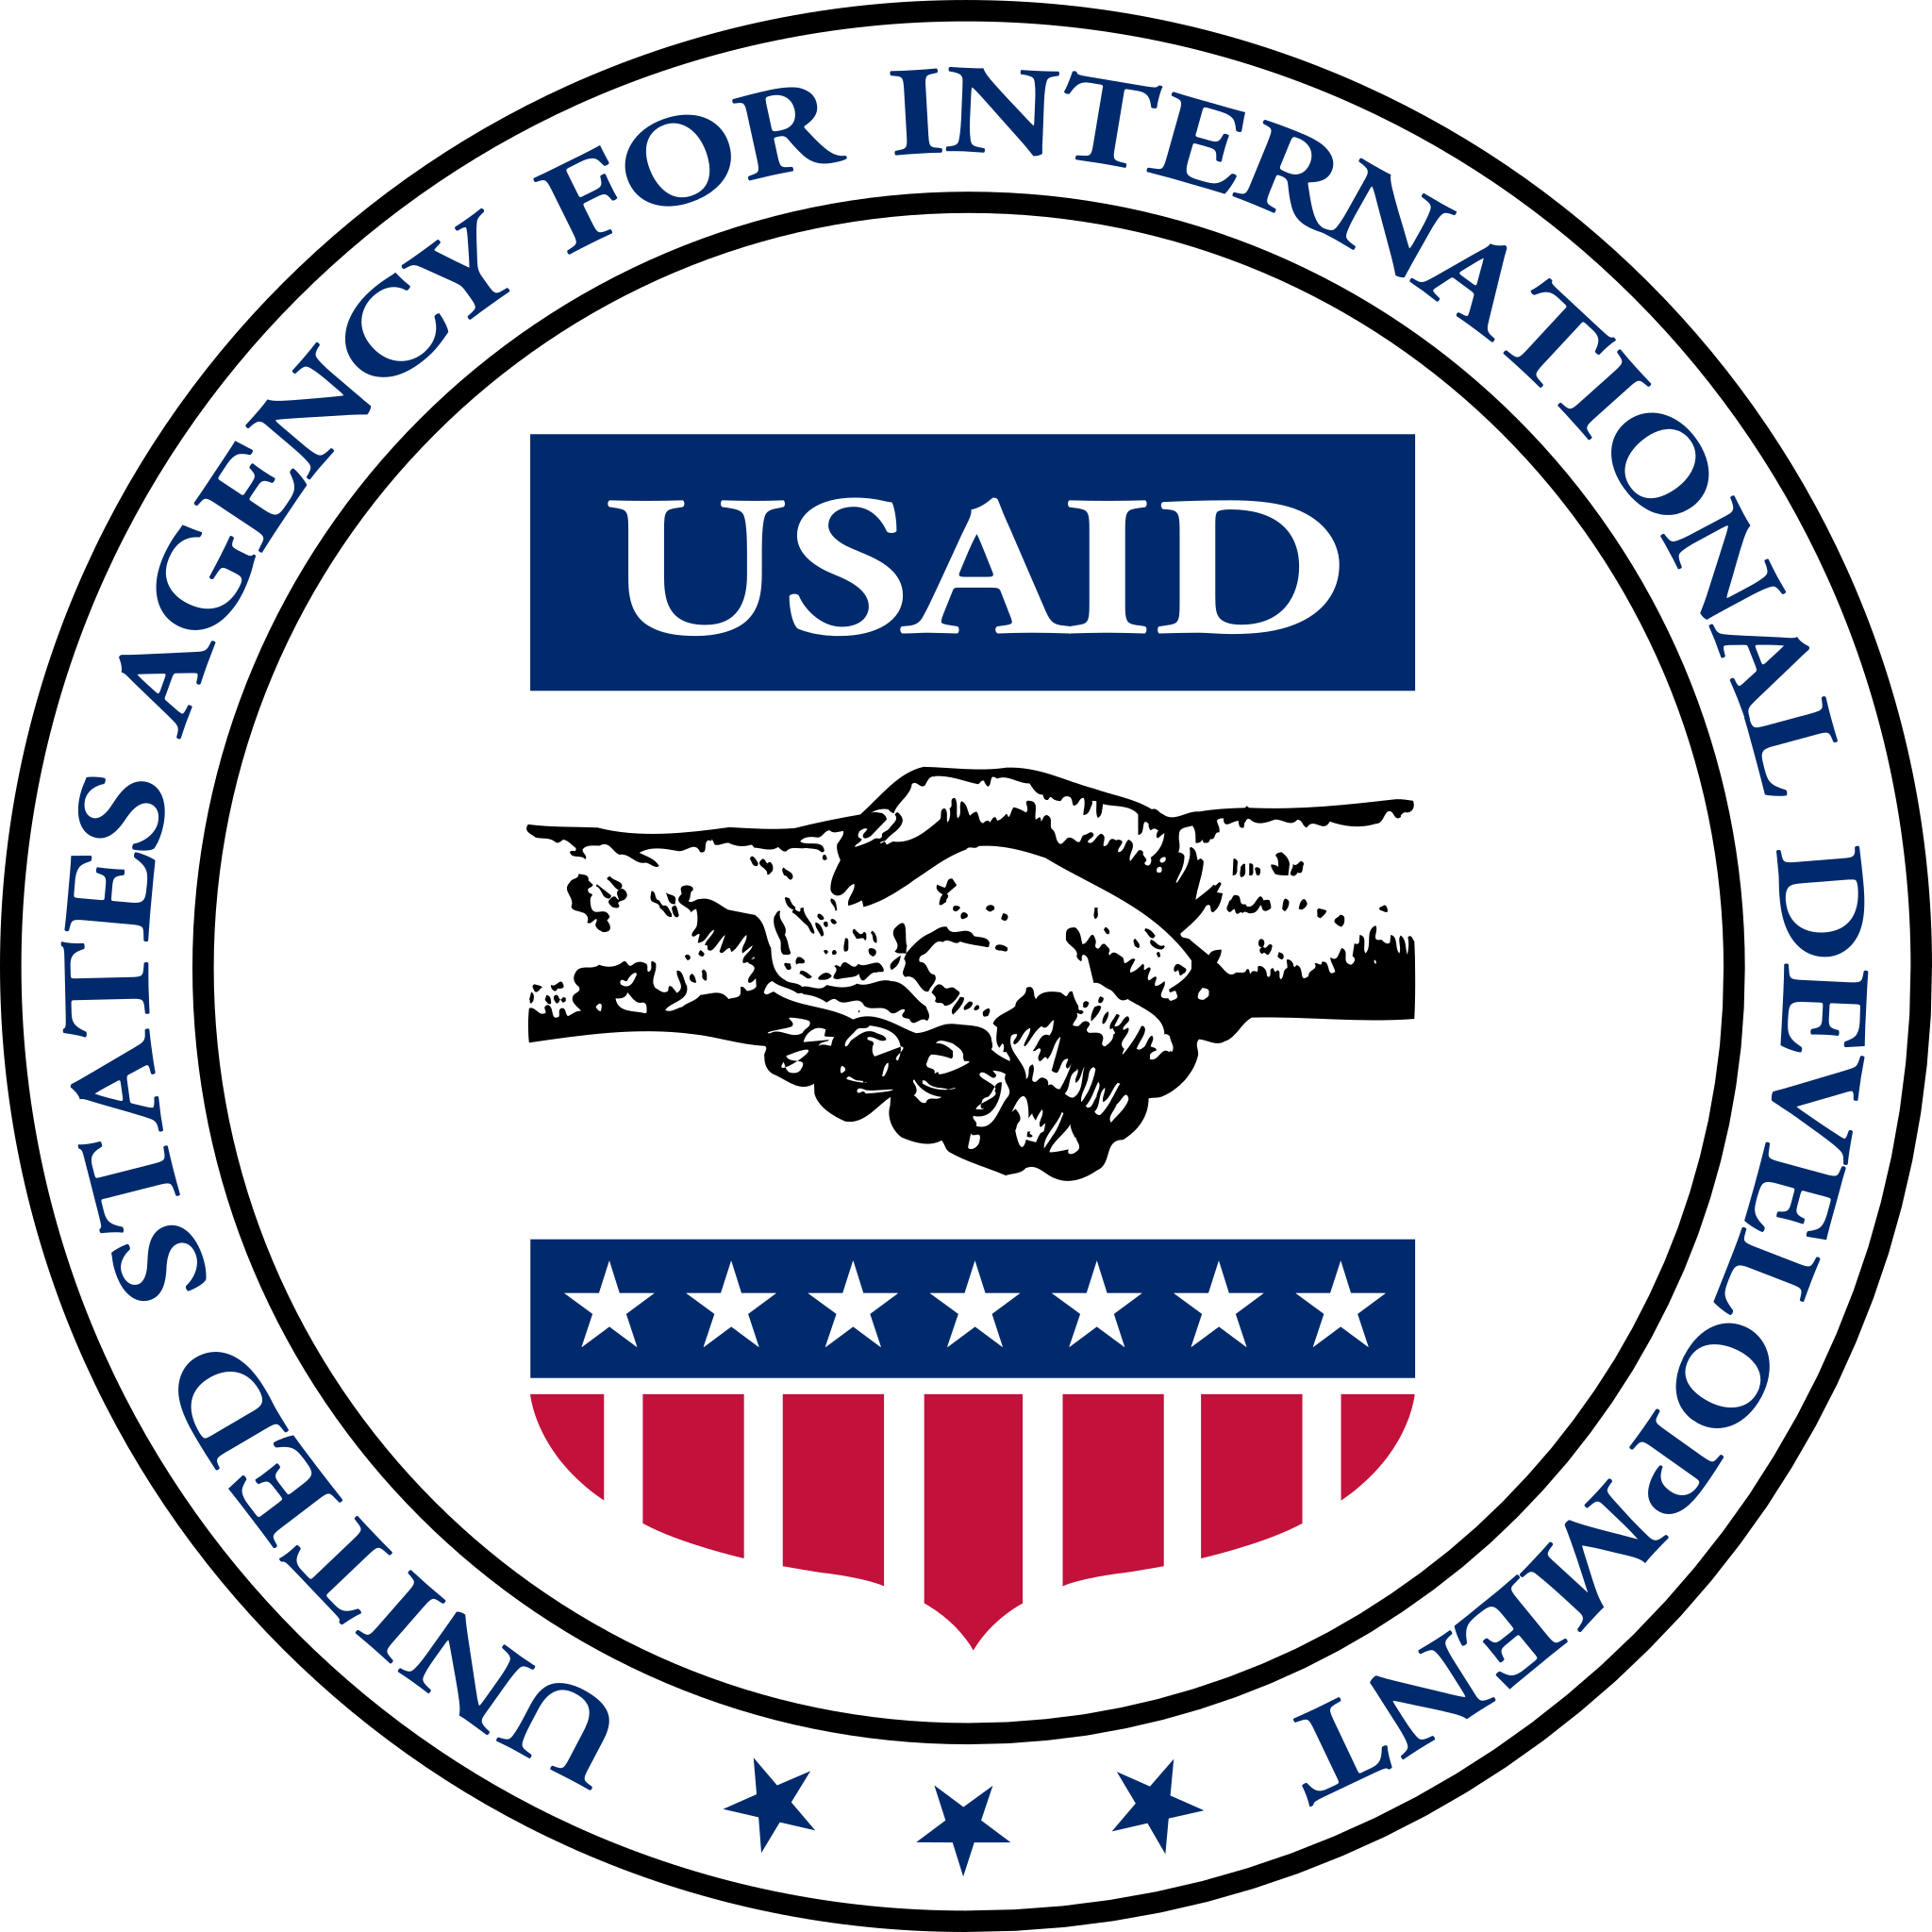 File:USAID-Seal.svg - Wikimedia Commons